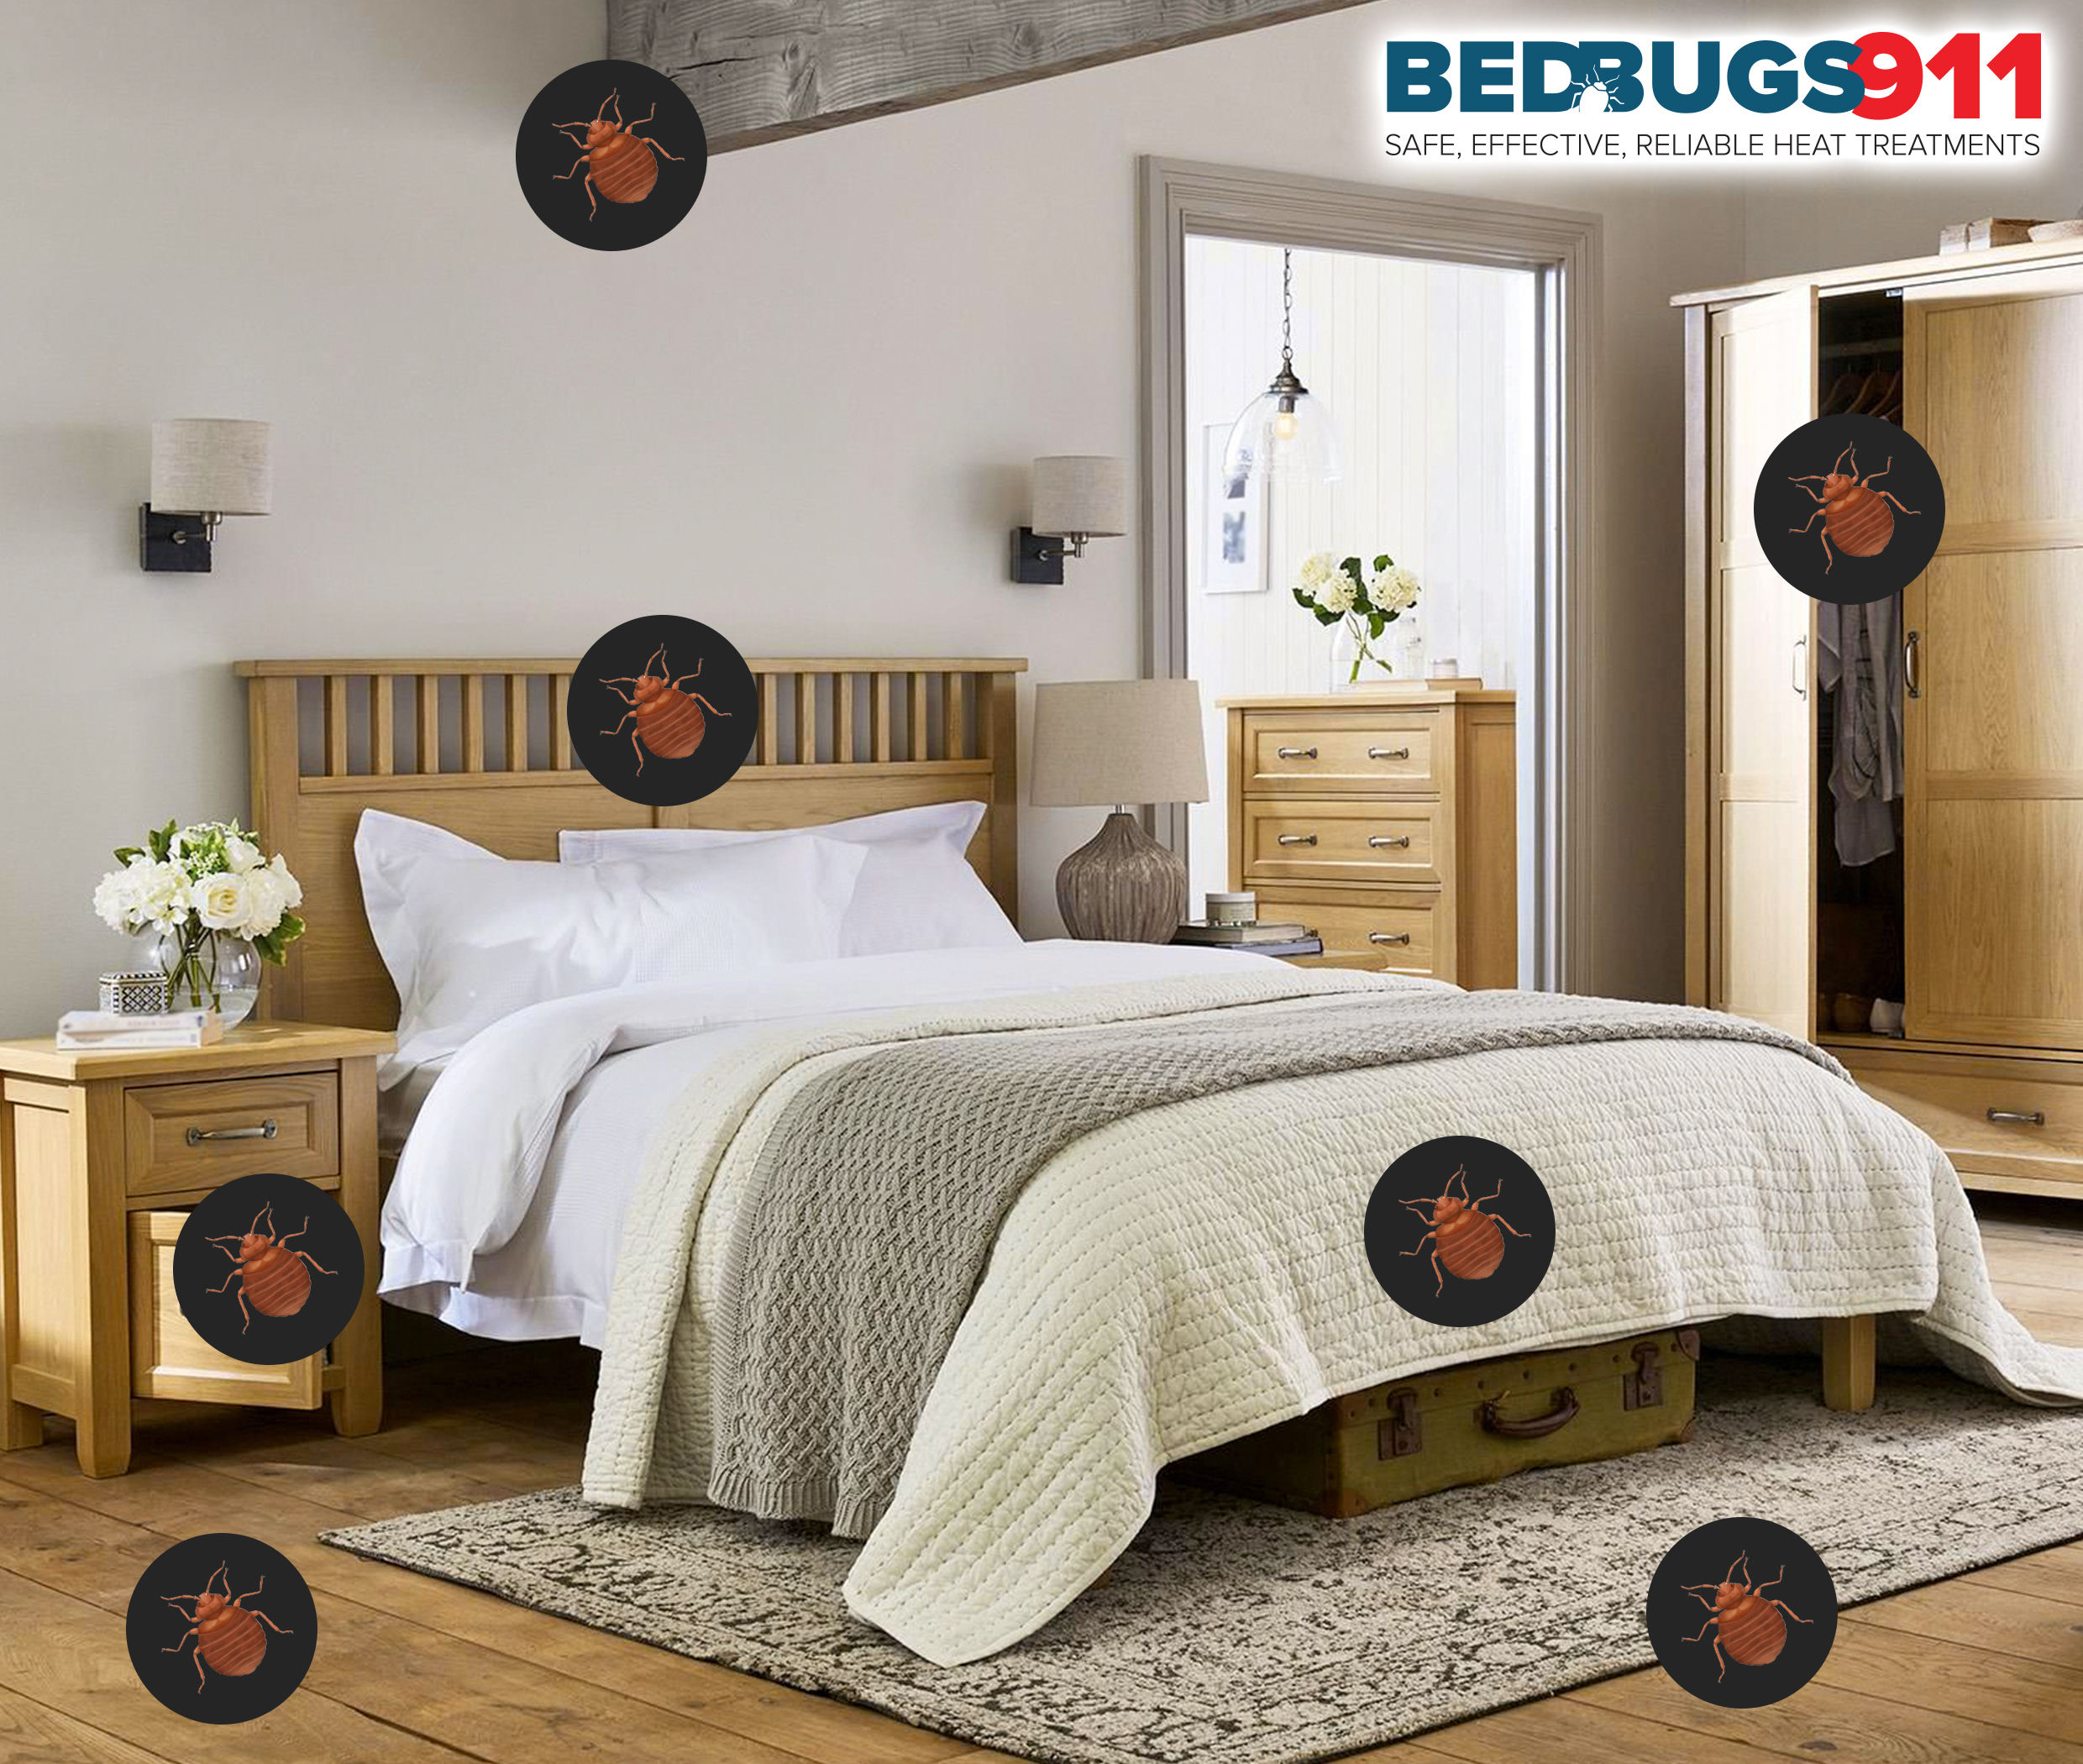 Allow the experts at Bed Bugs Rescue™ to rescue your Milwaukee area home from the dreaded bed bug